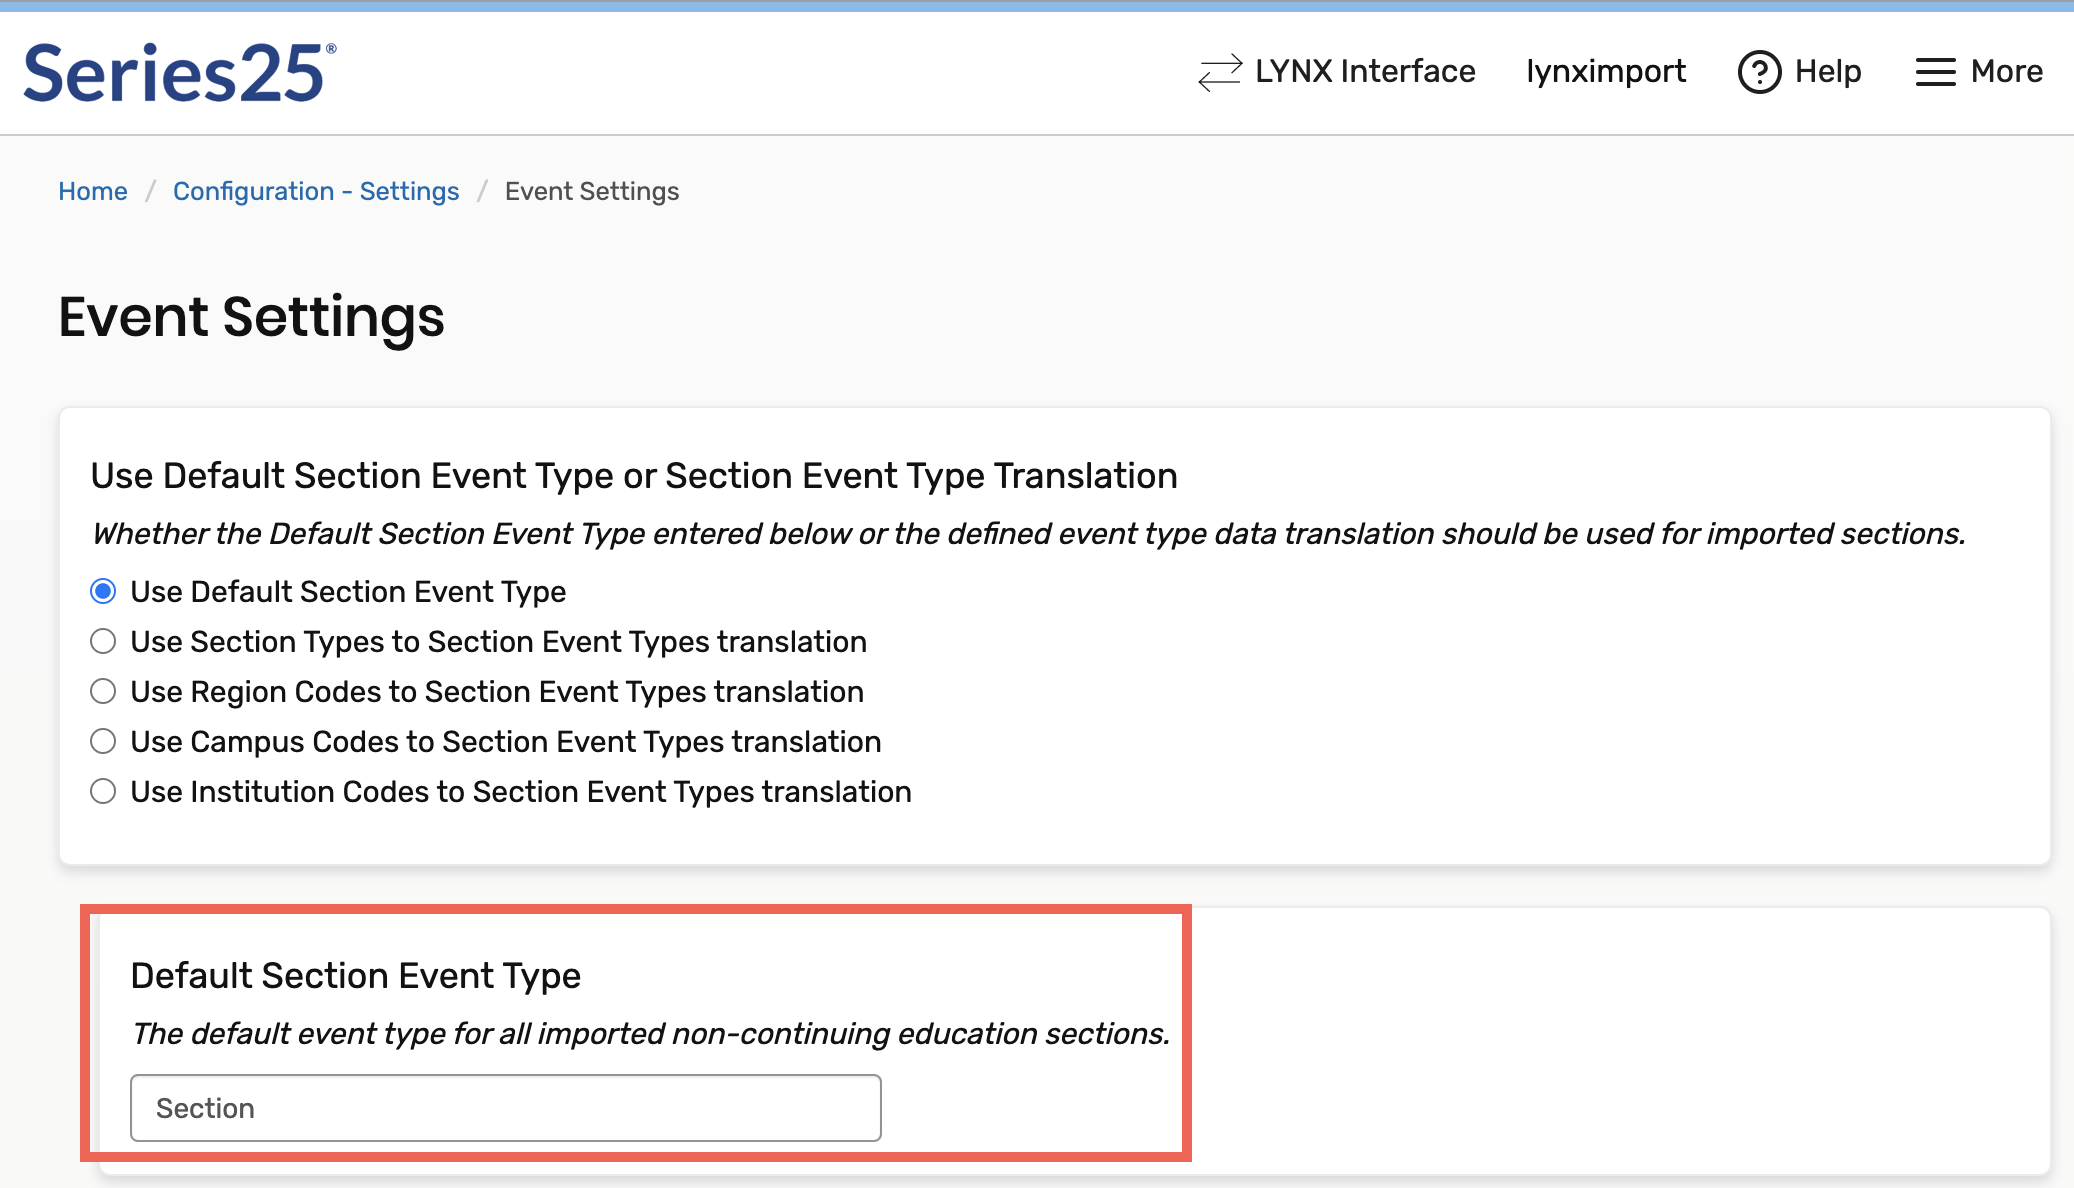 Choosing a value for the default section event type